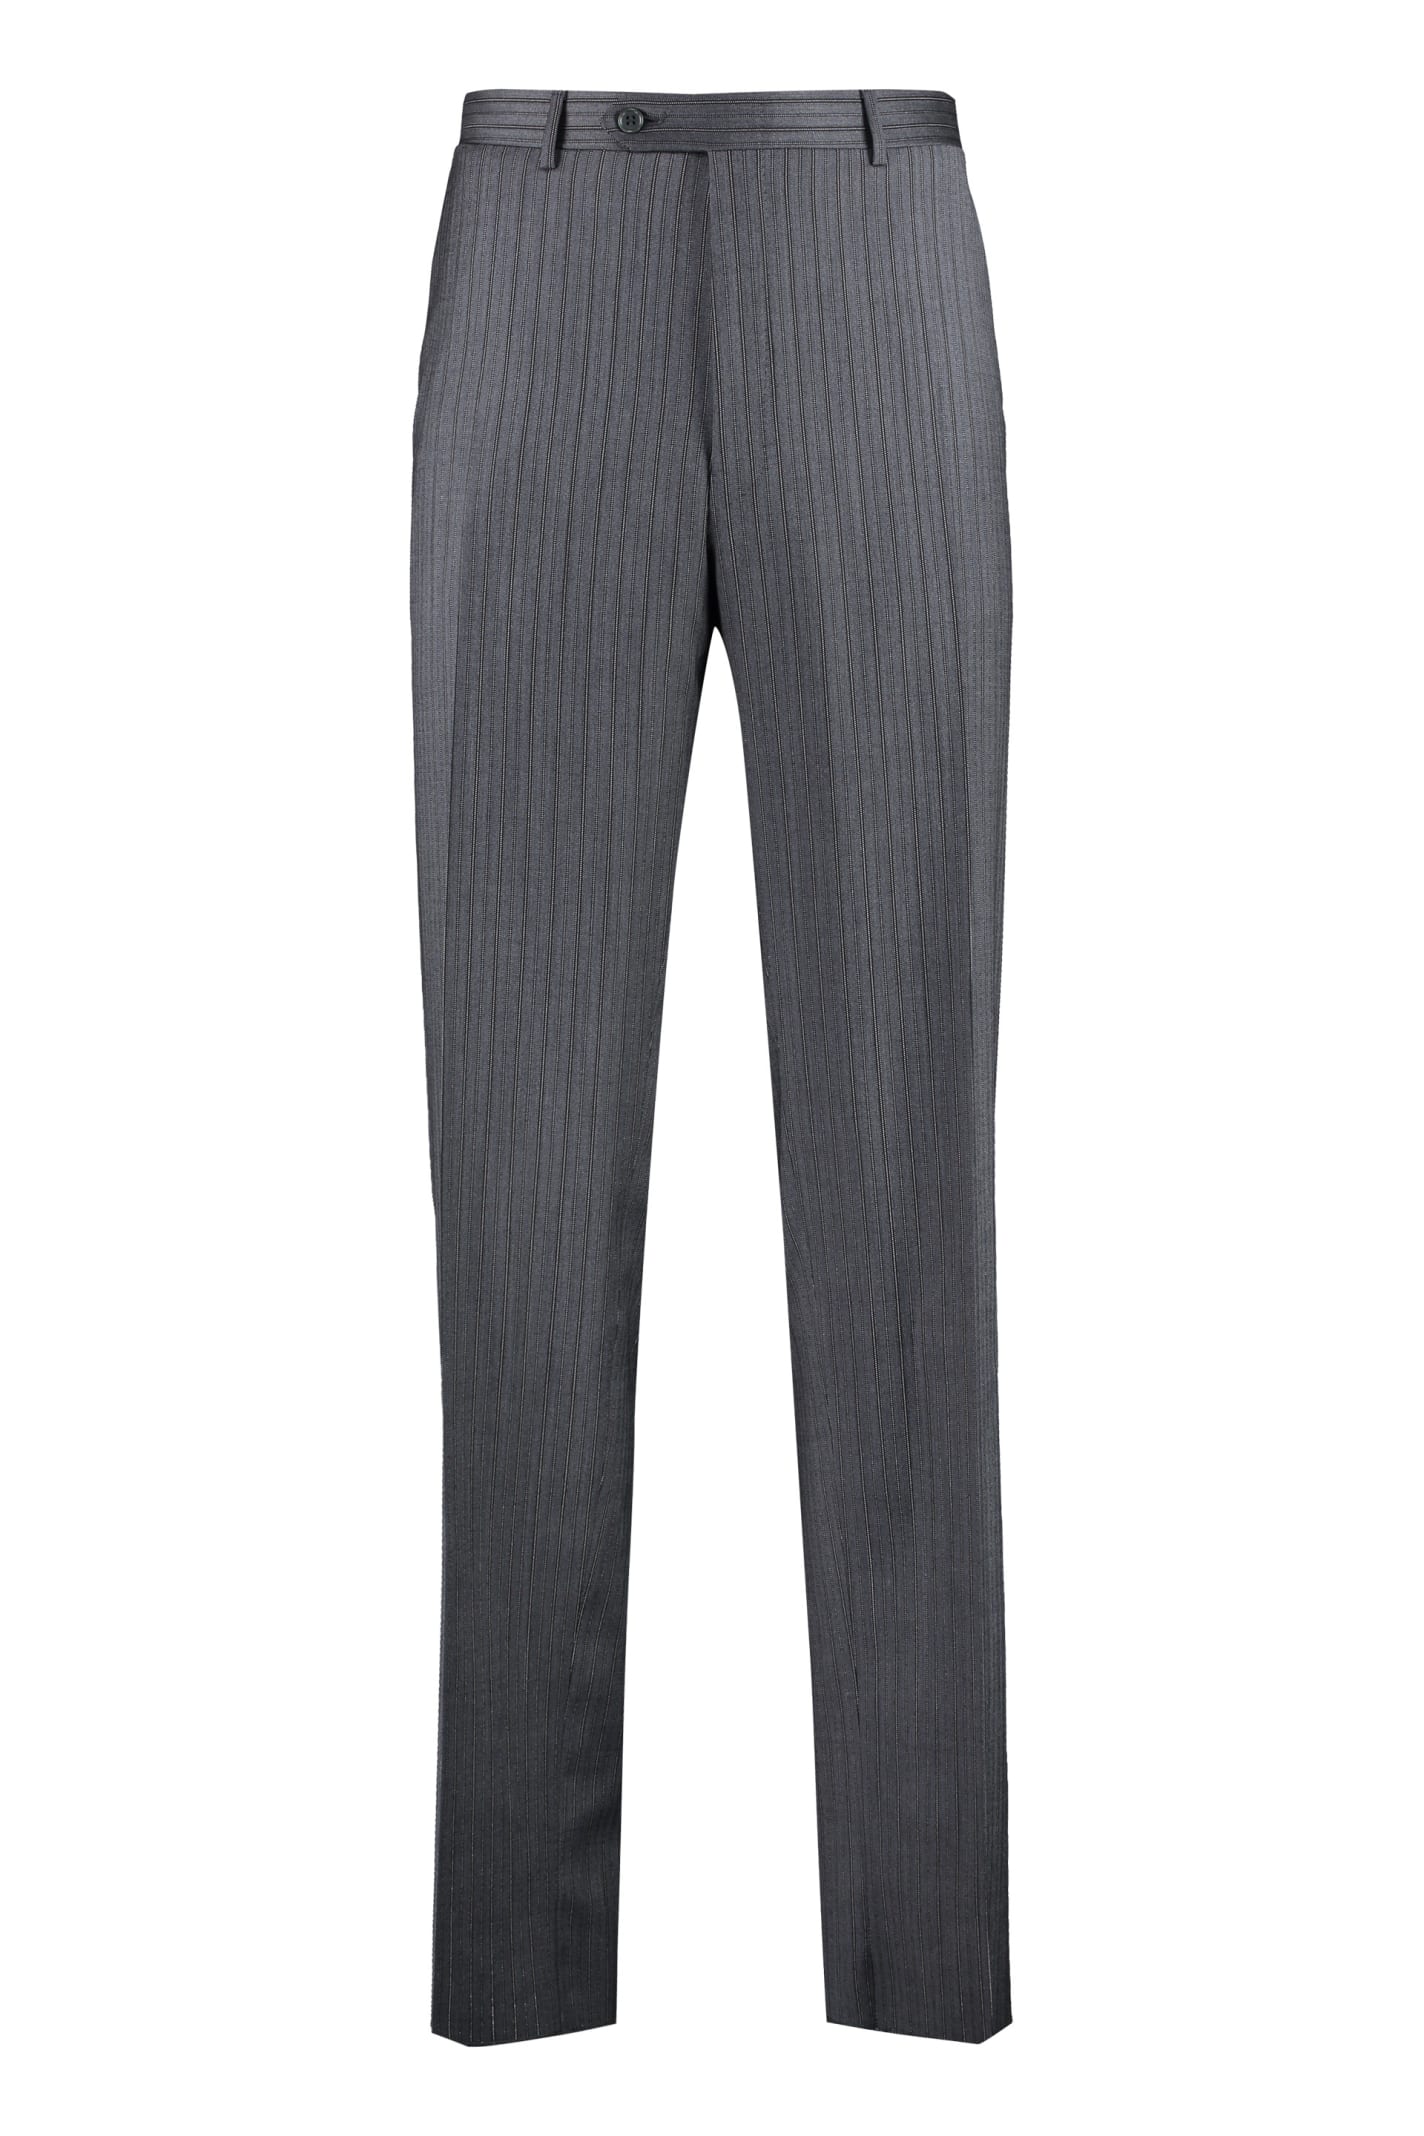 Canali Pin-striped Wool Tailored Trousers